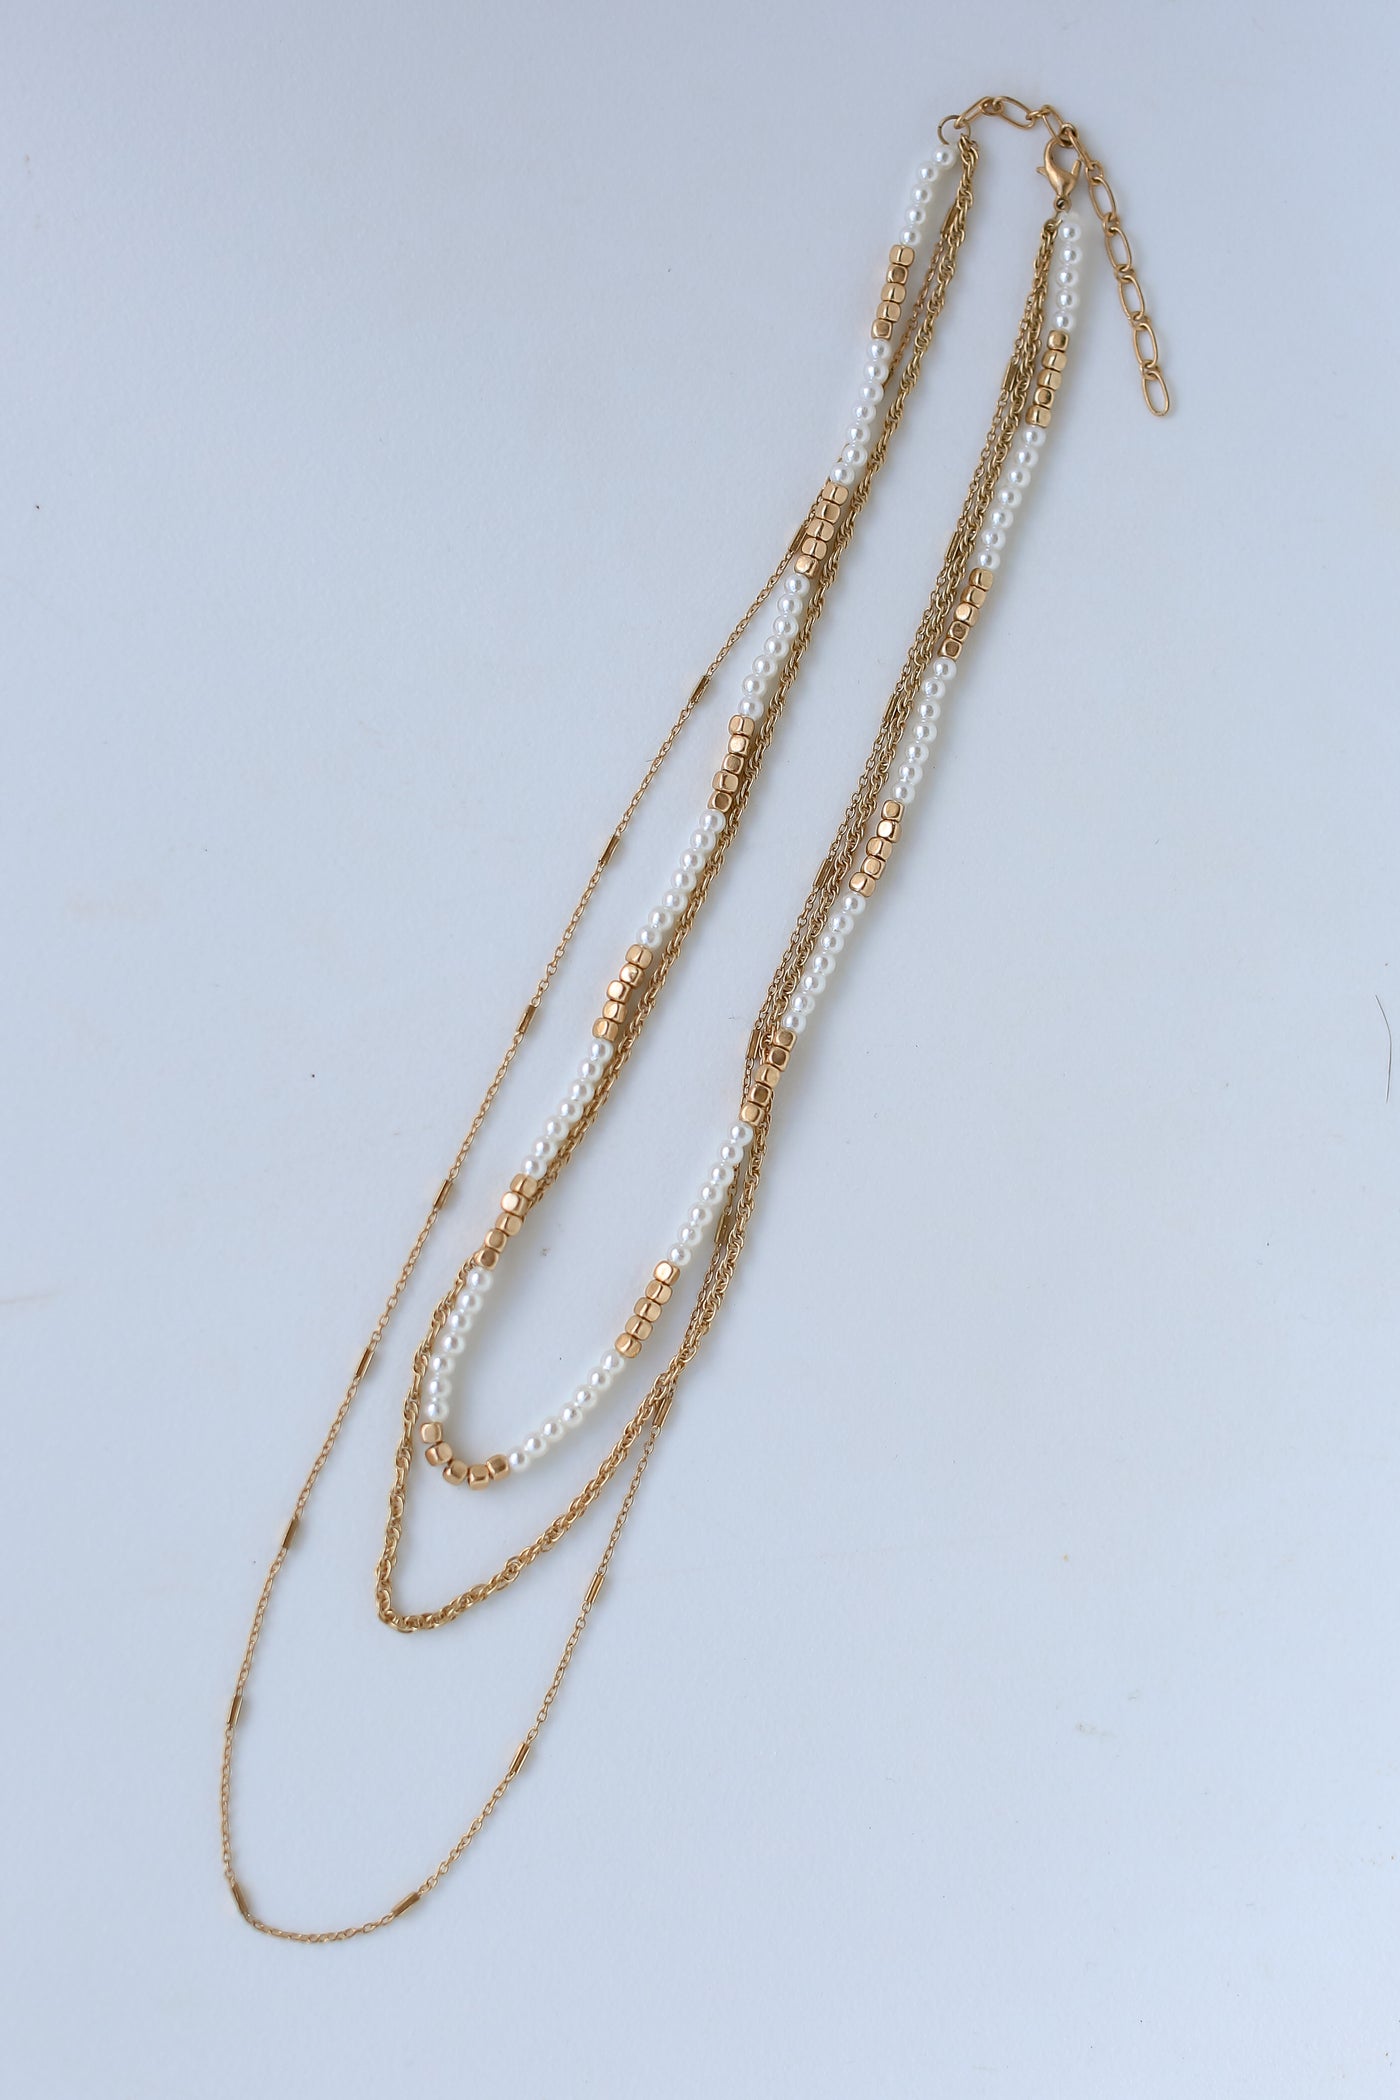 Gold Beaded Layered Necklace flat lay